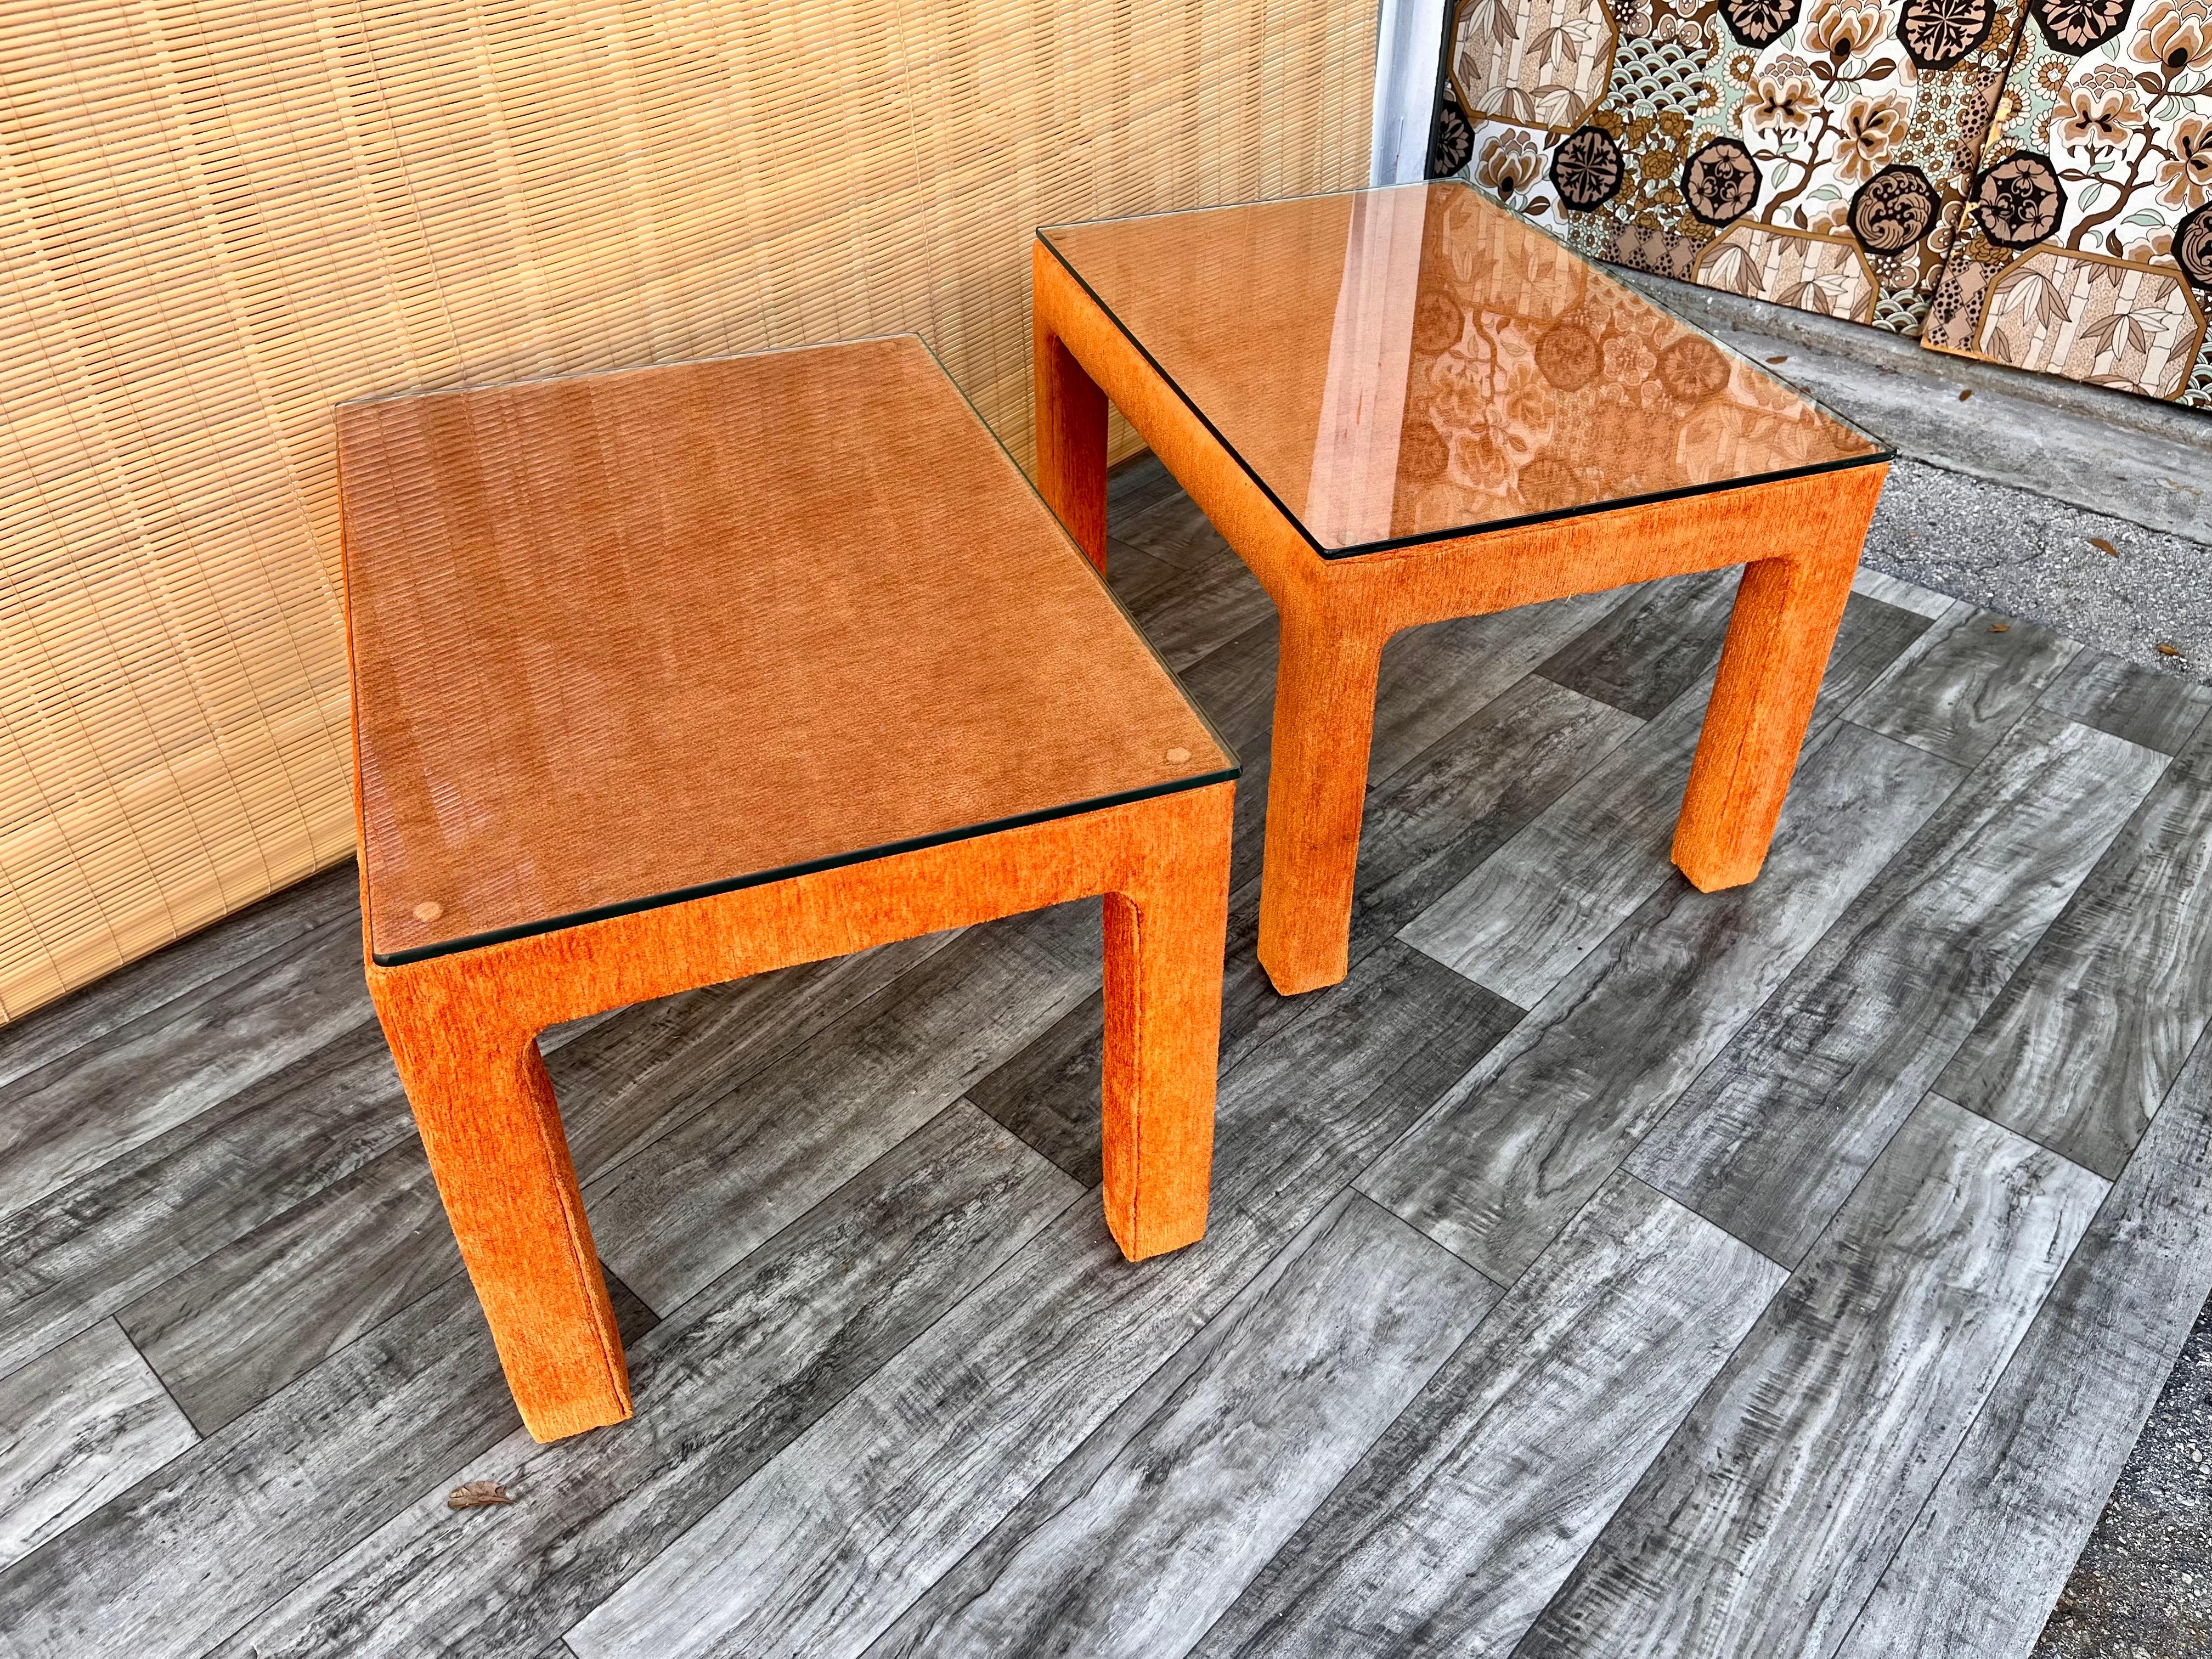 American Pair of Mid-Century Modern Fully Upholstered Side Tables, circa 1970s For Sale